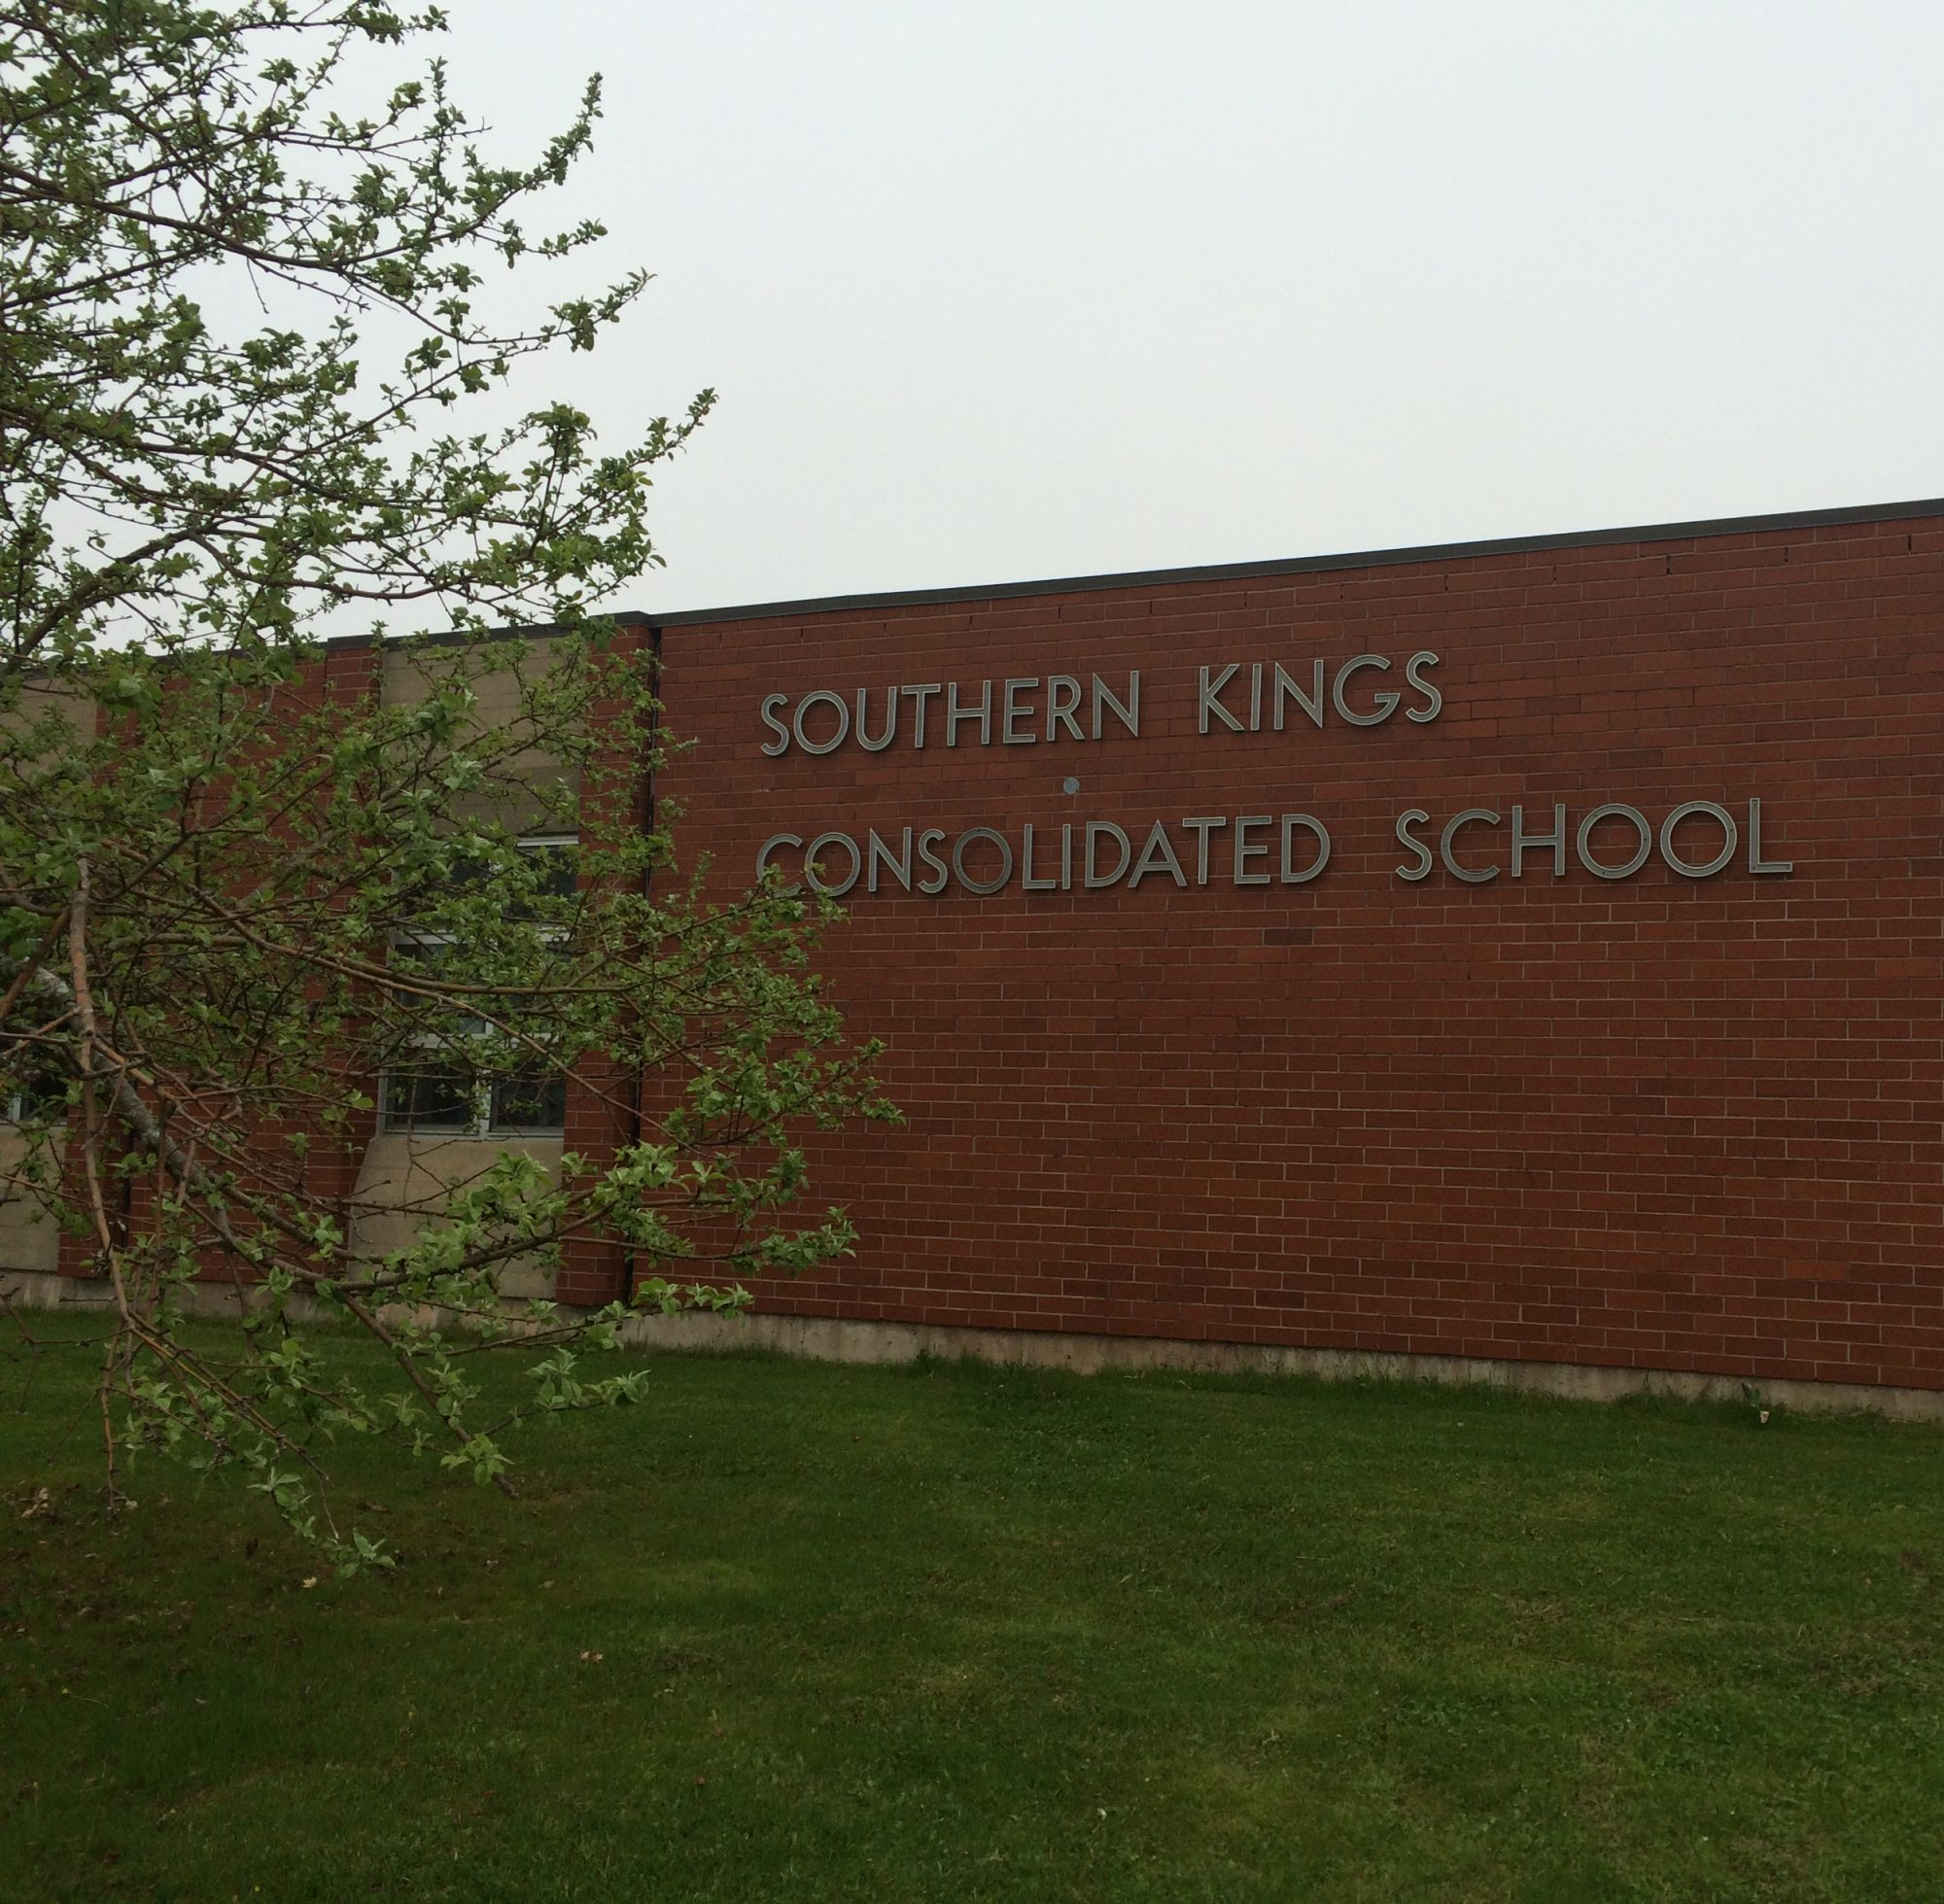 20192020 School Calendar | Southern Kings Consolidated School intended for 2020 And 2020 Pei School Calendar